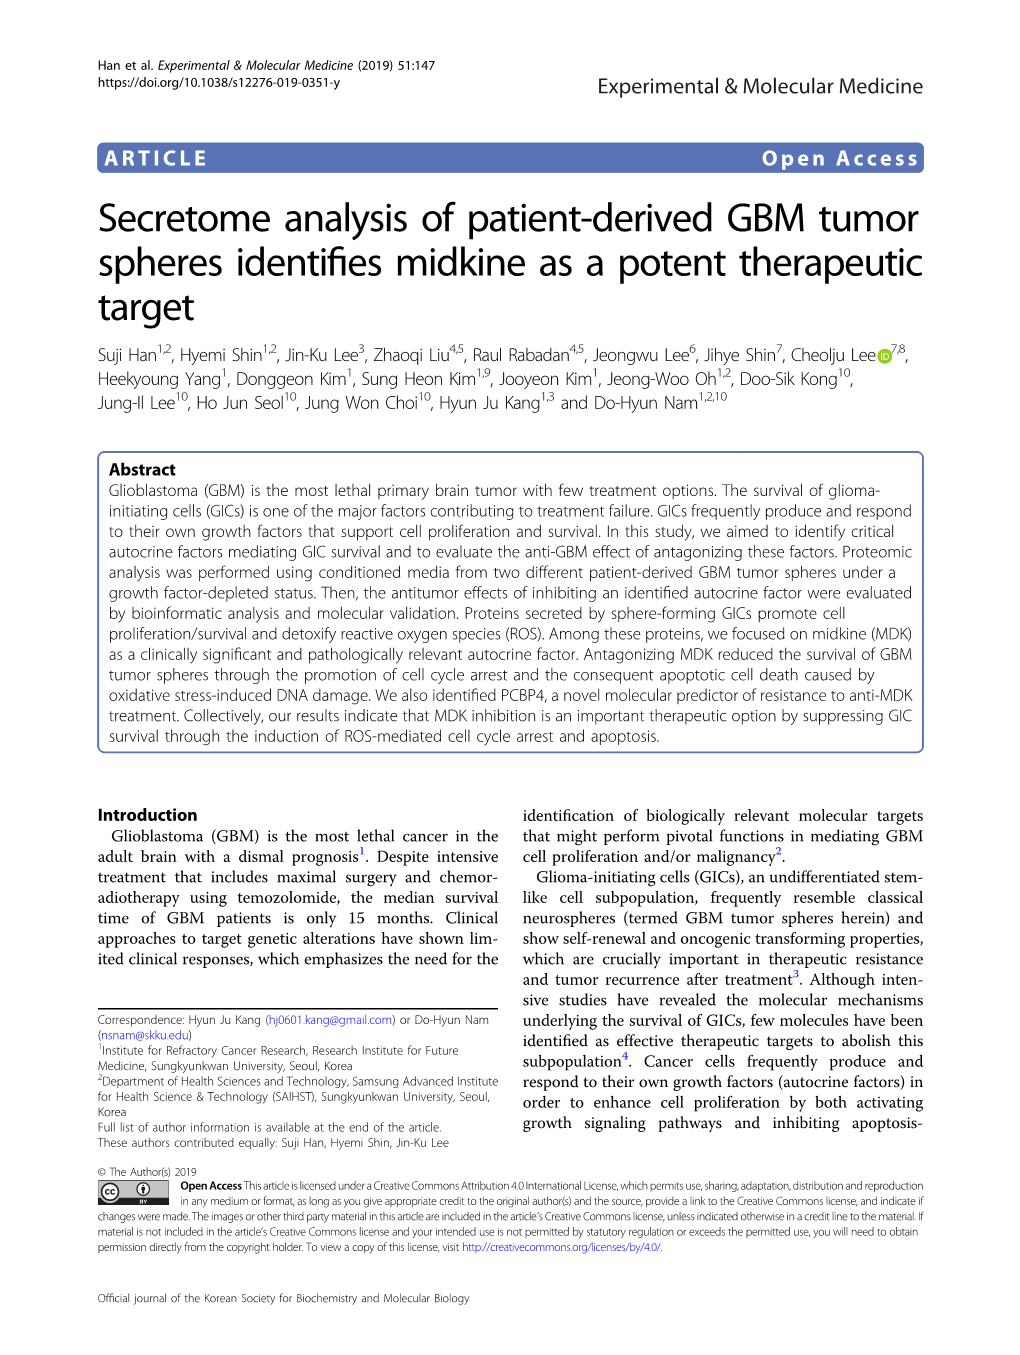 Secretome Analysis of Patient-Derived GBM Tumor Spheres Identifies Midkine As a Potent Therapeutic Target